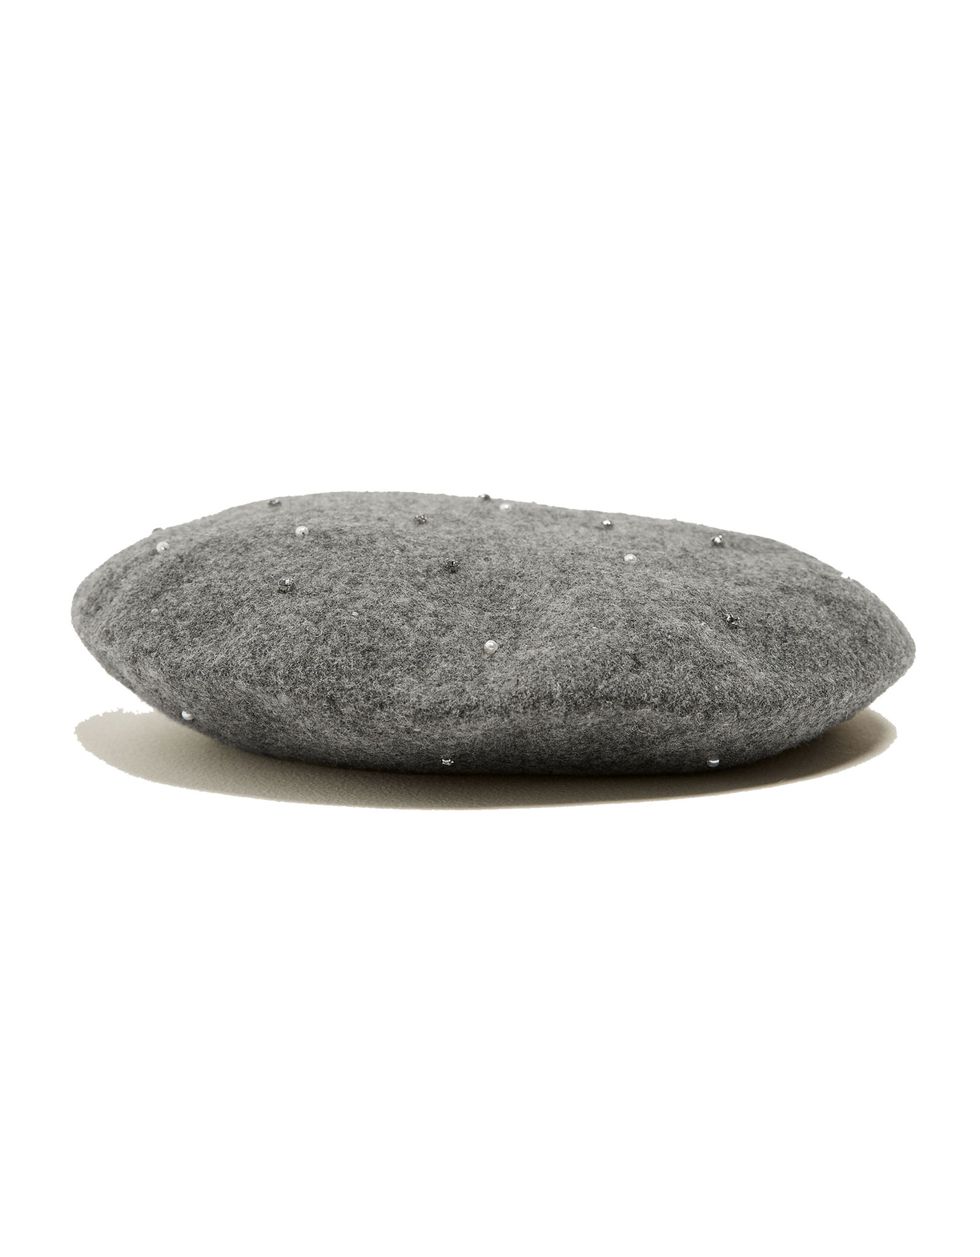 Rock, Grey, Oval, Natural material, Still life photography, Graphite, Pebble, 